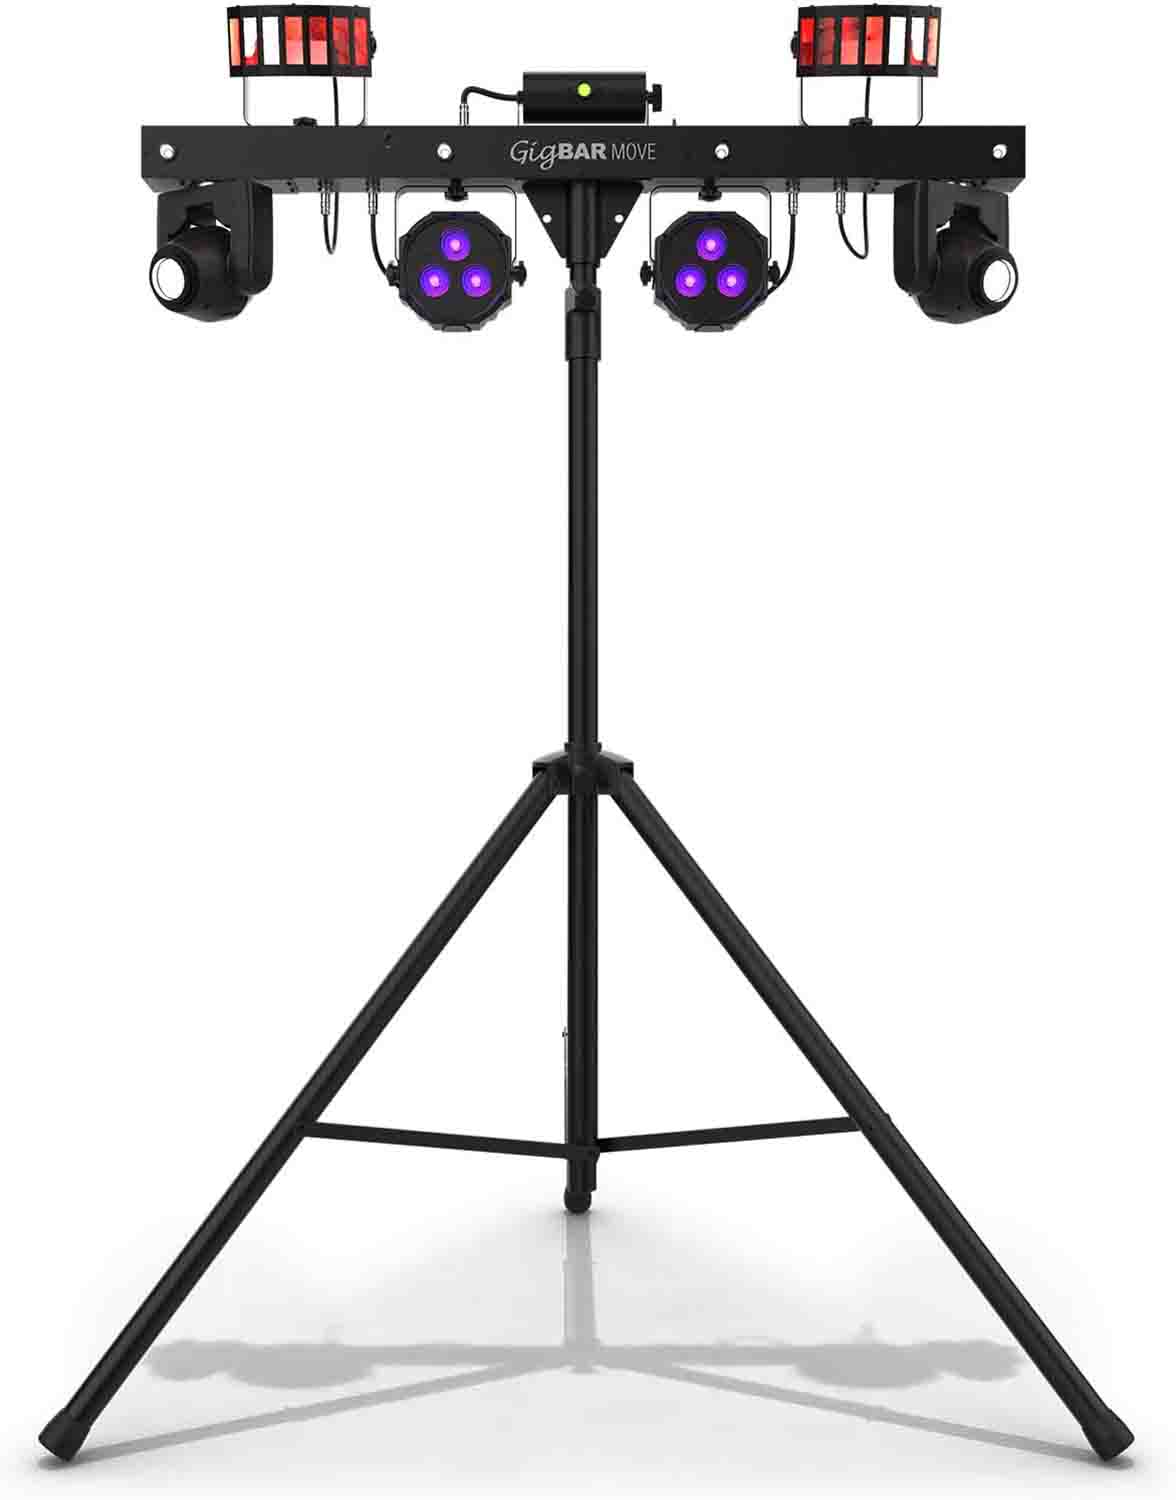 Open Box: Chauvet DJ GIGBARMOVE 5-in-1 Lighting System with Pre-Mounted on a Single Bar - Hollywood DJ